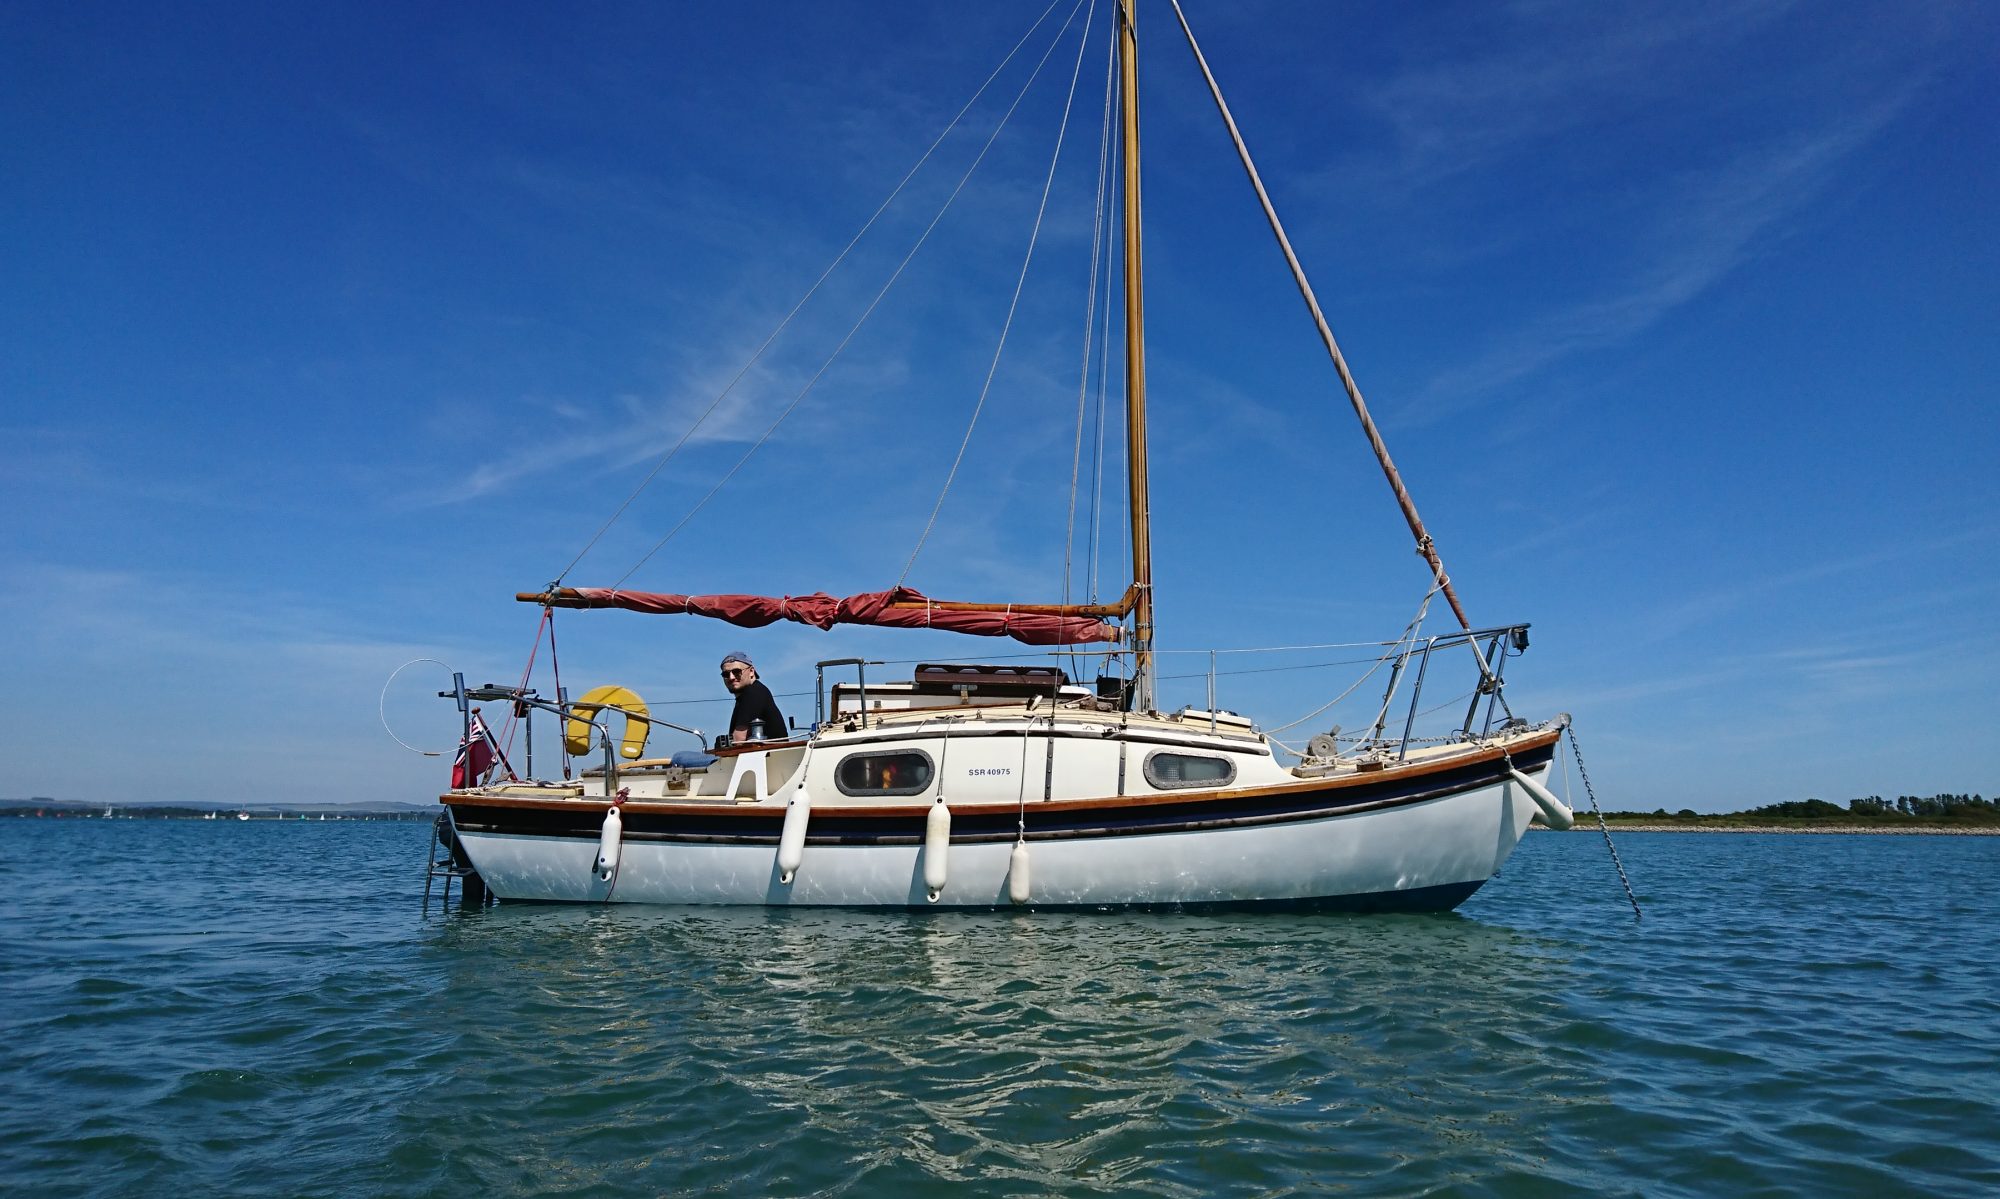 22 ft westerly sailboat